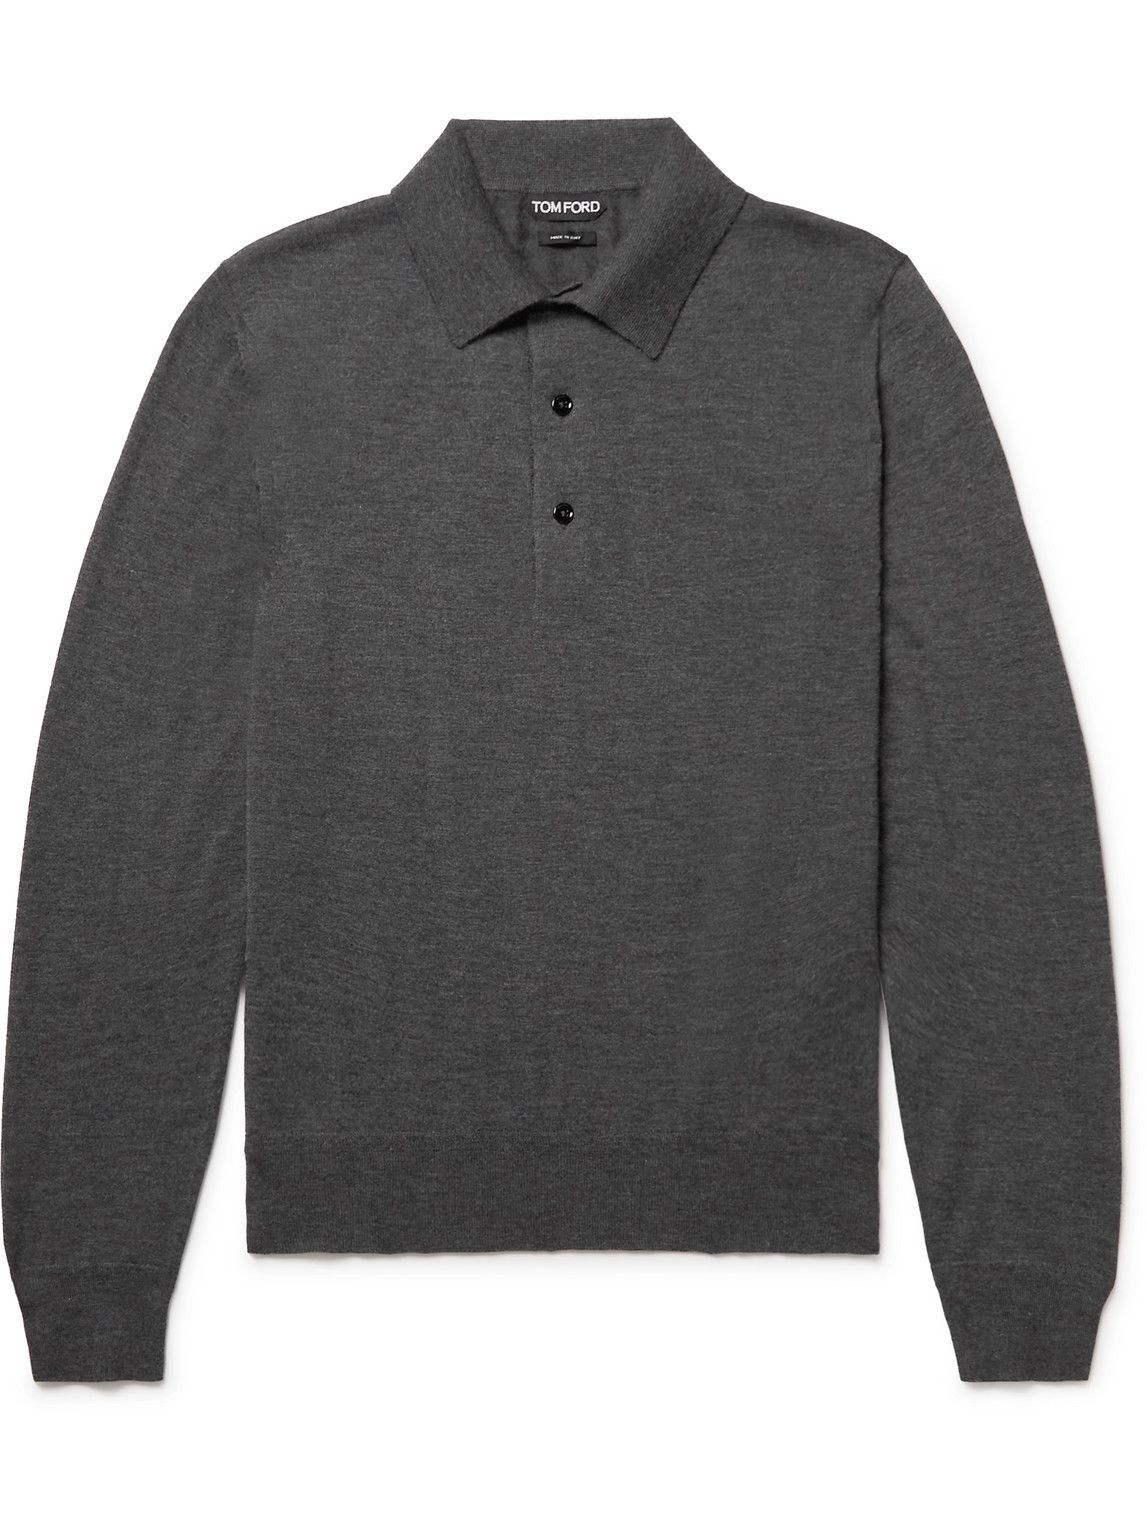 TOM FORD - Cashmere and Silk-Blend Polo Shirt - Gray TOM FORD